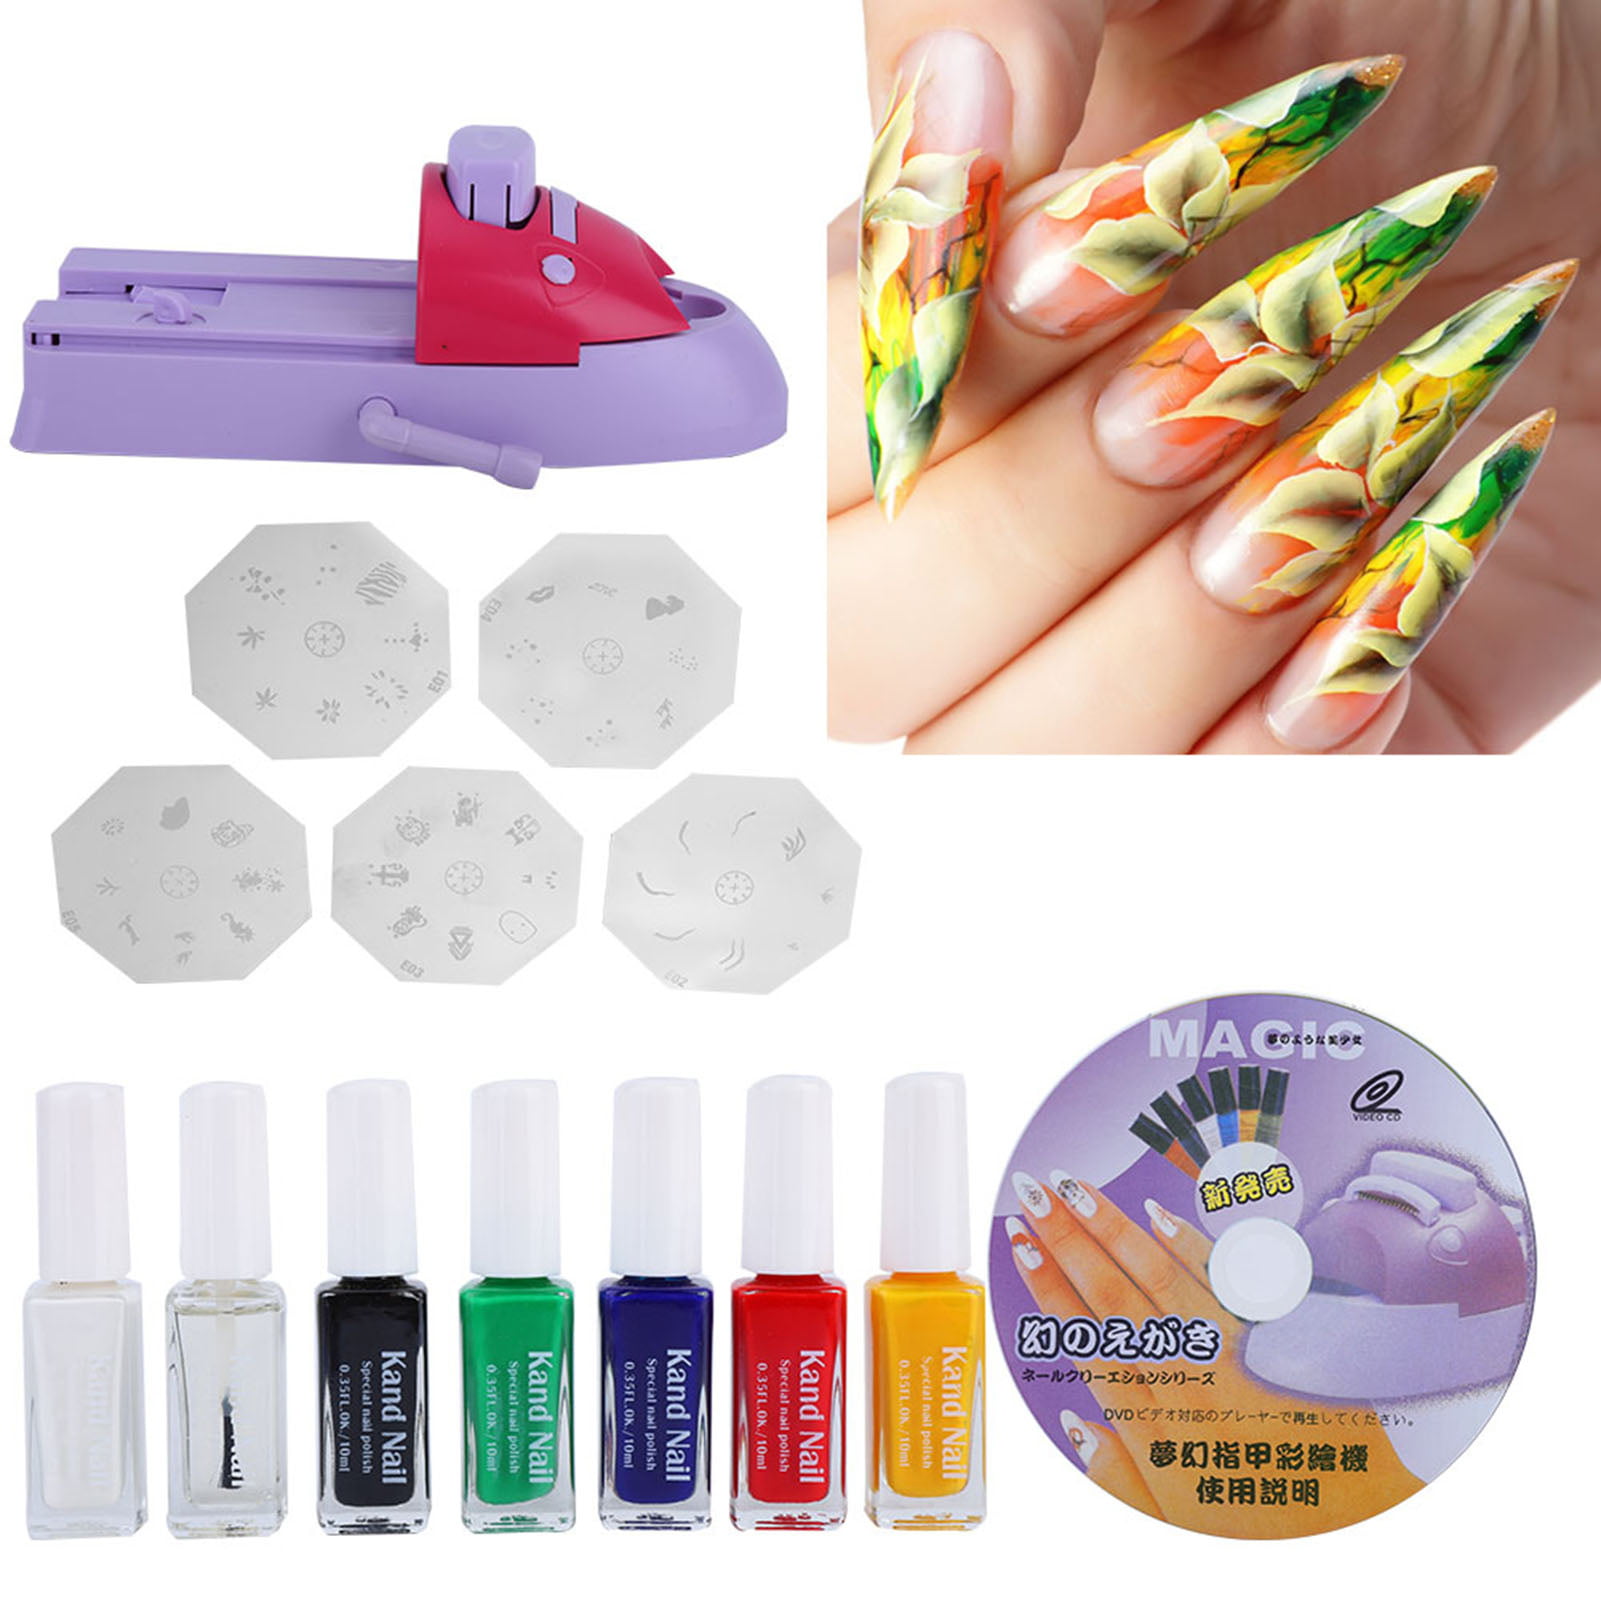 Buy Wifi Mobile Digital Nail Art Printer, DIY and Salon Ready Online in  India - Etsy